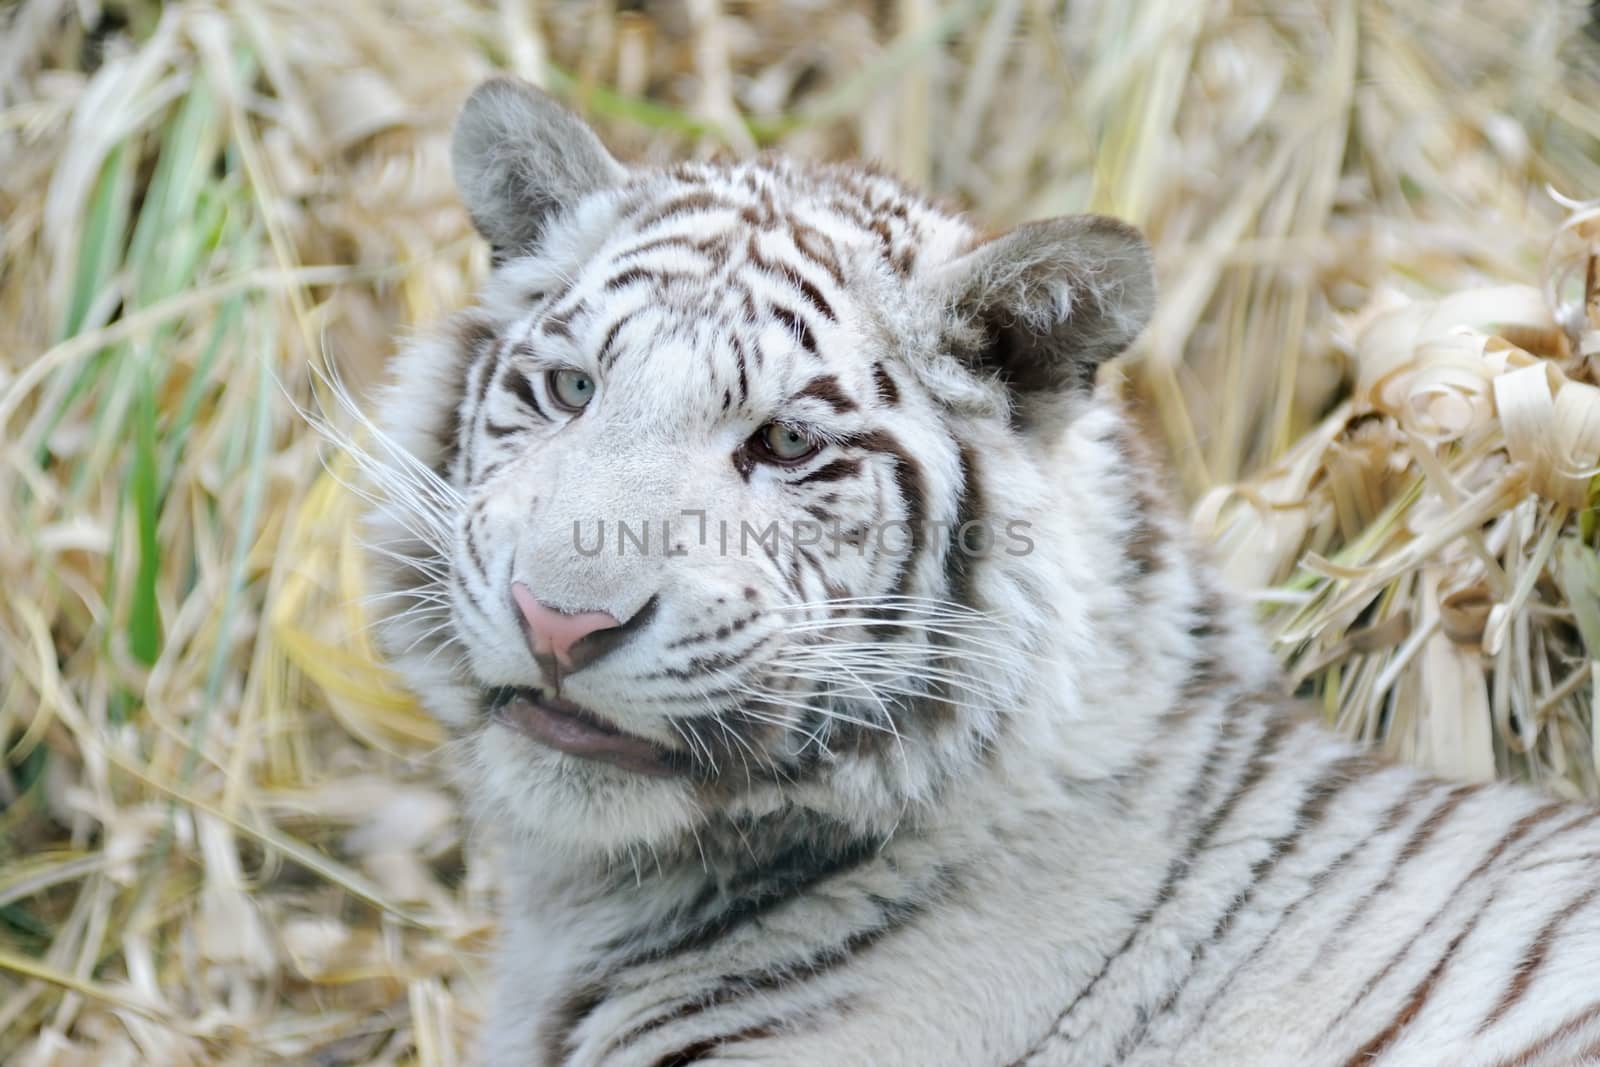 White tiger looks like its smiling